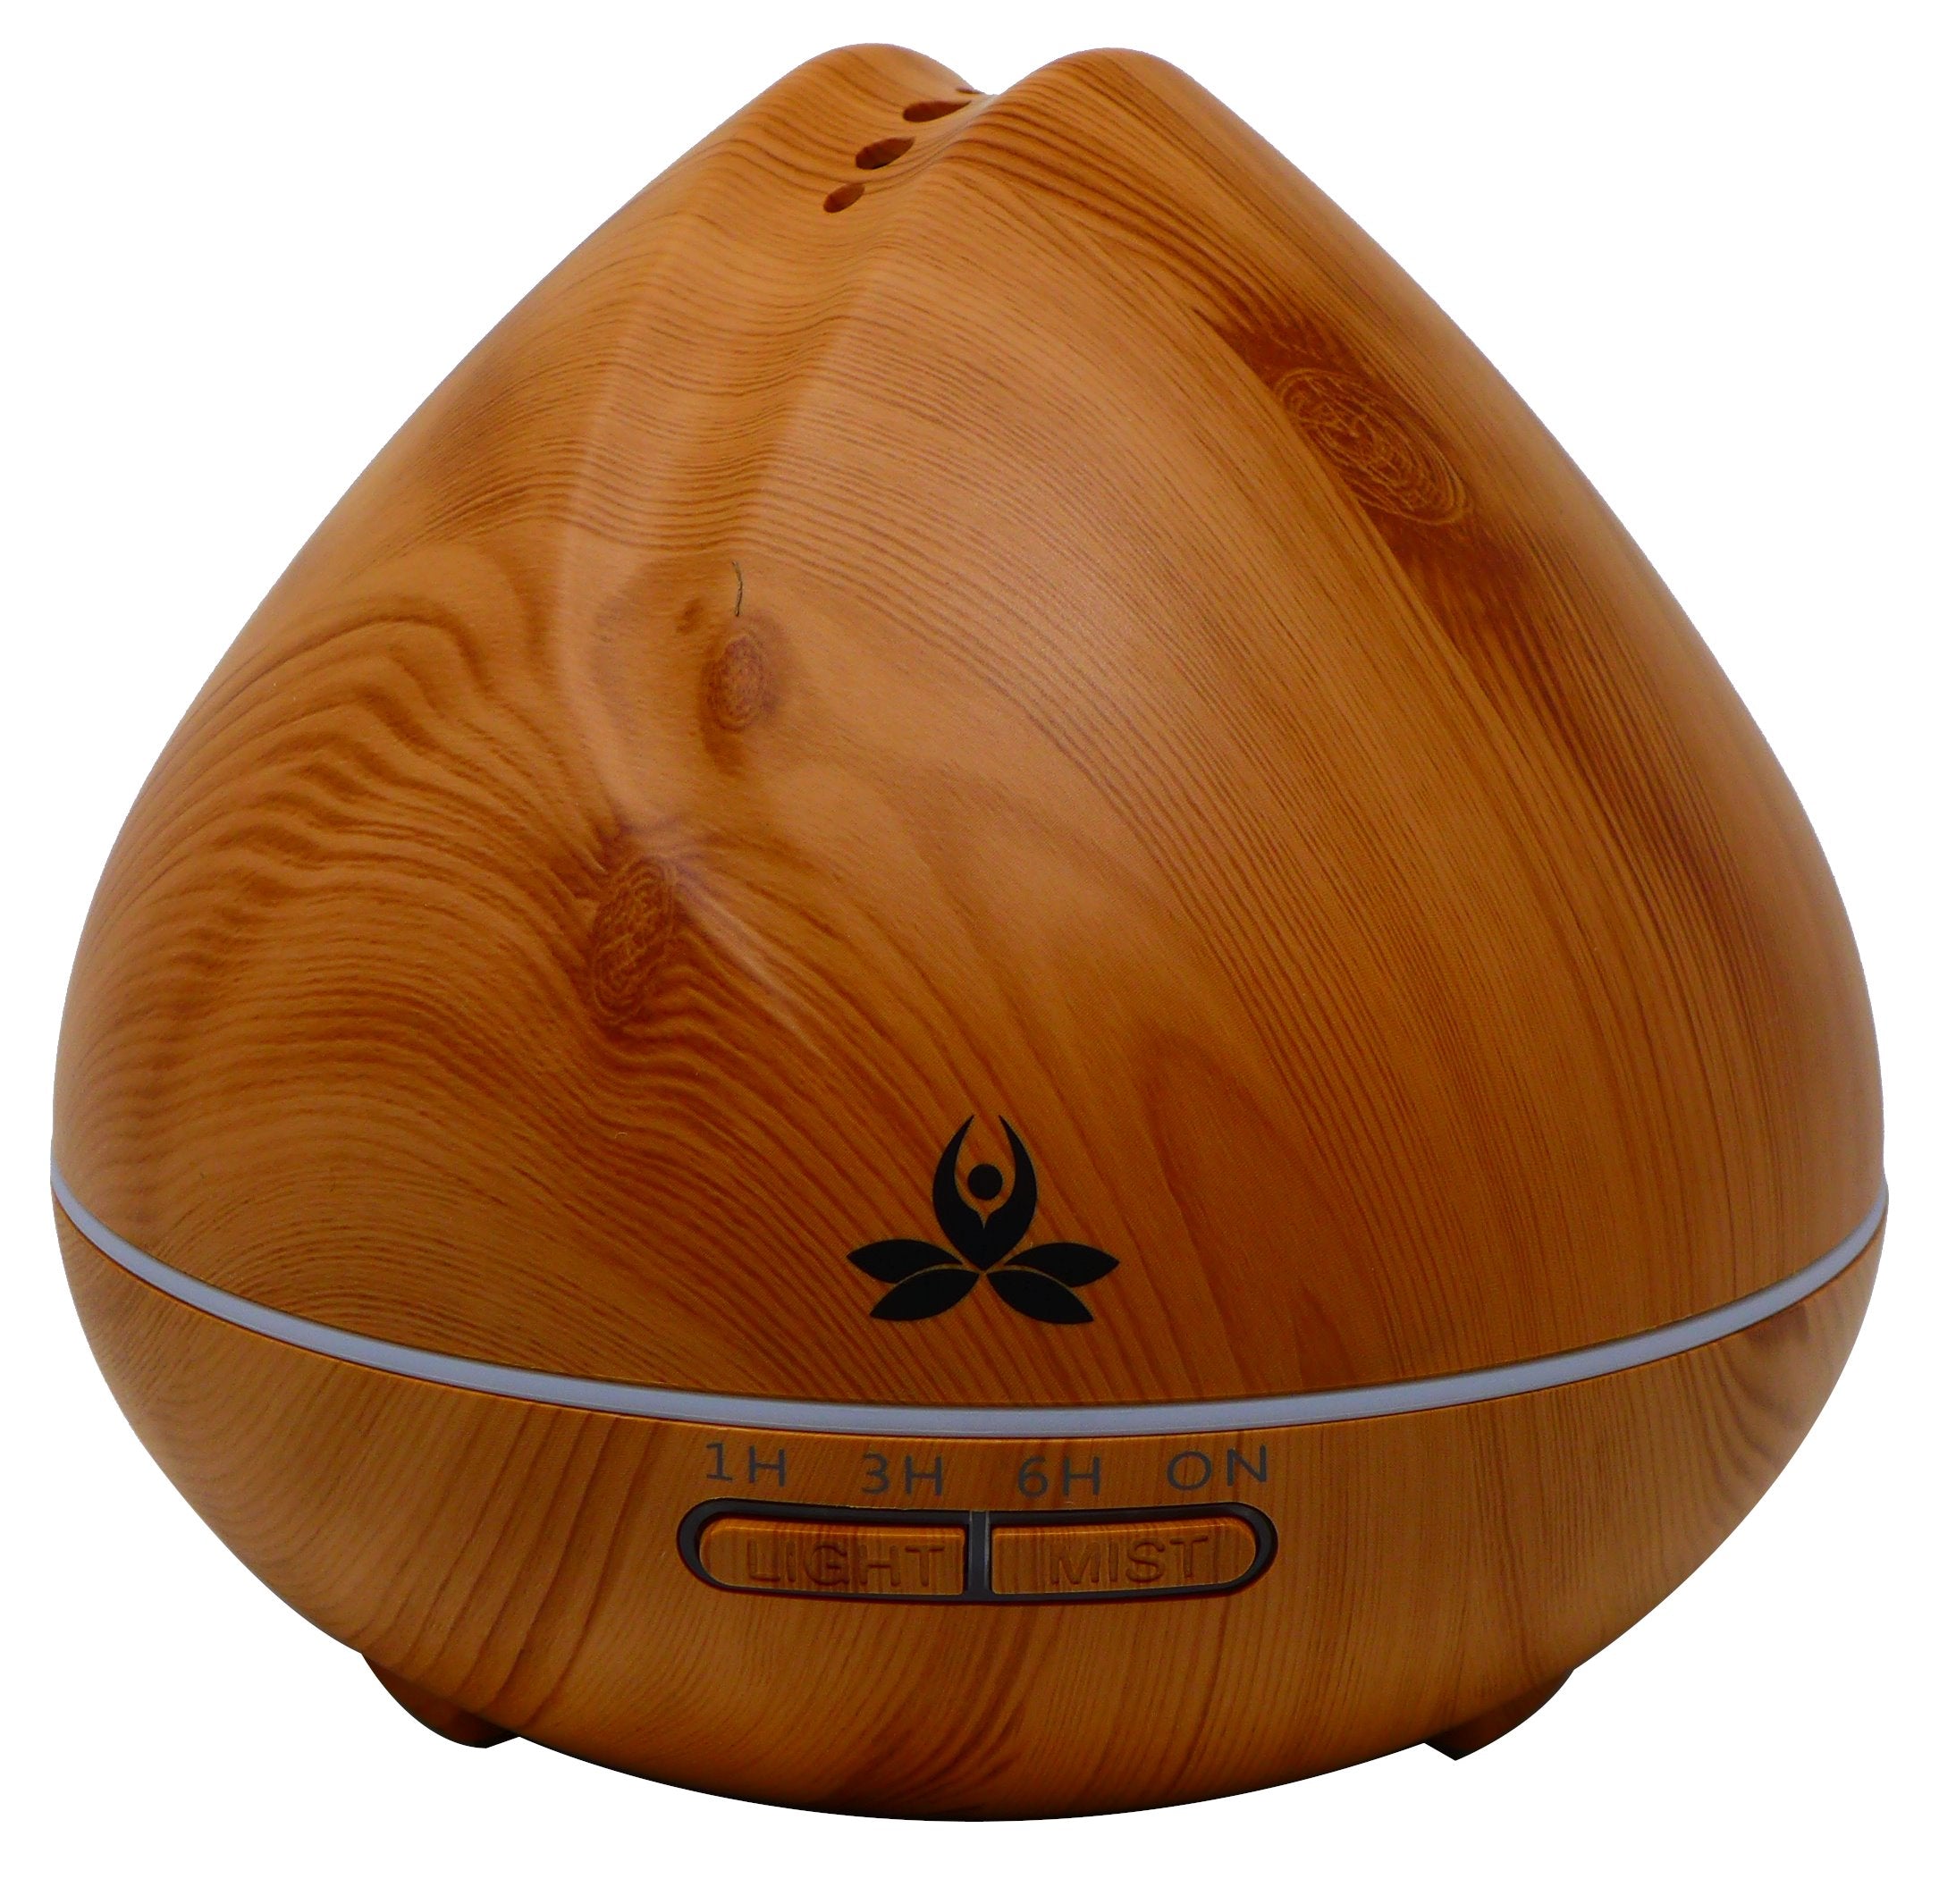 Portable Aromatherapy Diffuser (Yatra) Electronic Diffuser Light Brown 500ml with Bluetooth speaker 